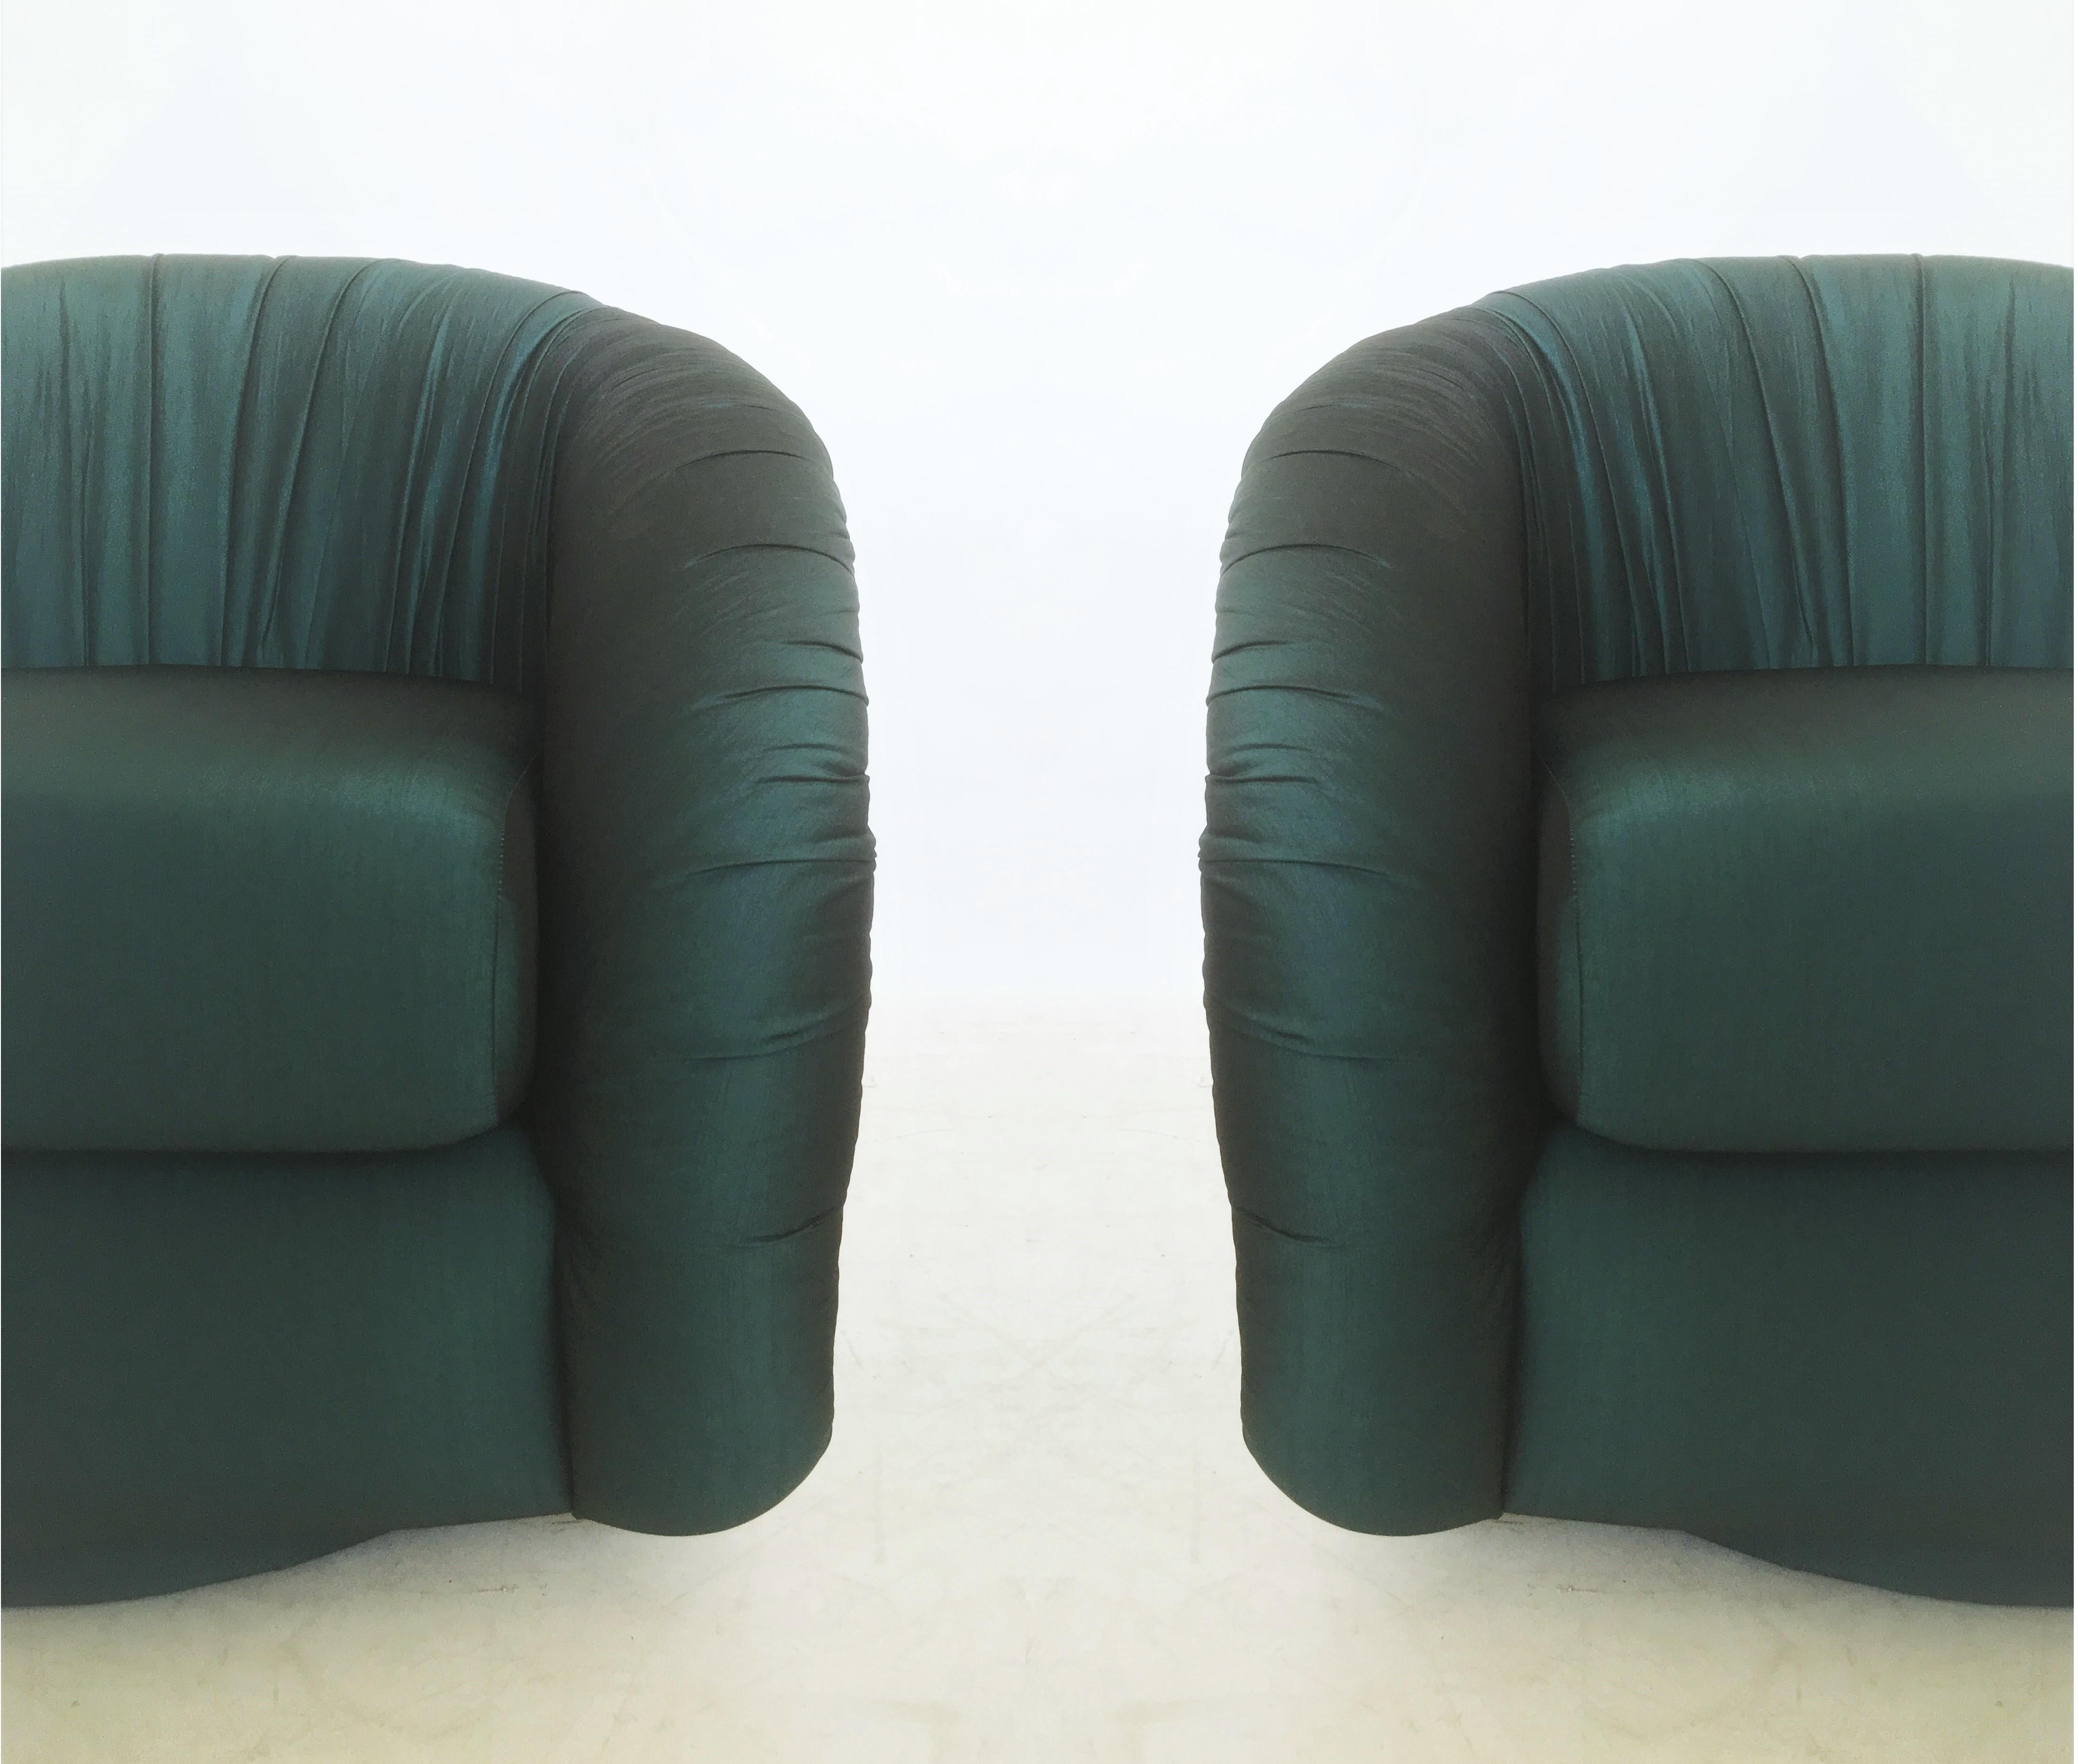 Upholstery Pair of Mid-century Swivel Chairs in the style of Milo Baughman for Directional For Sale